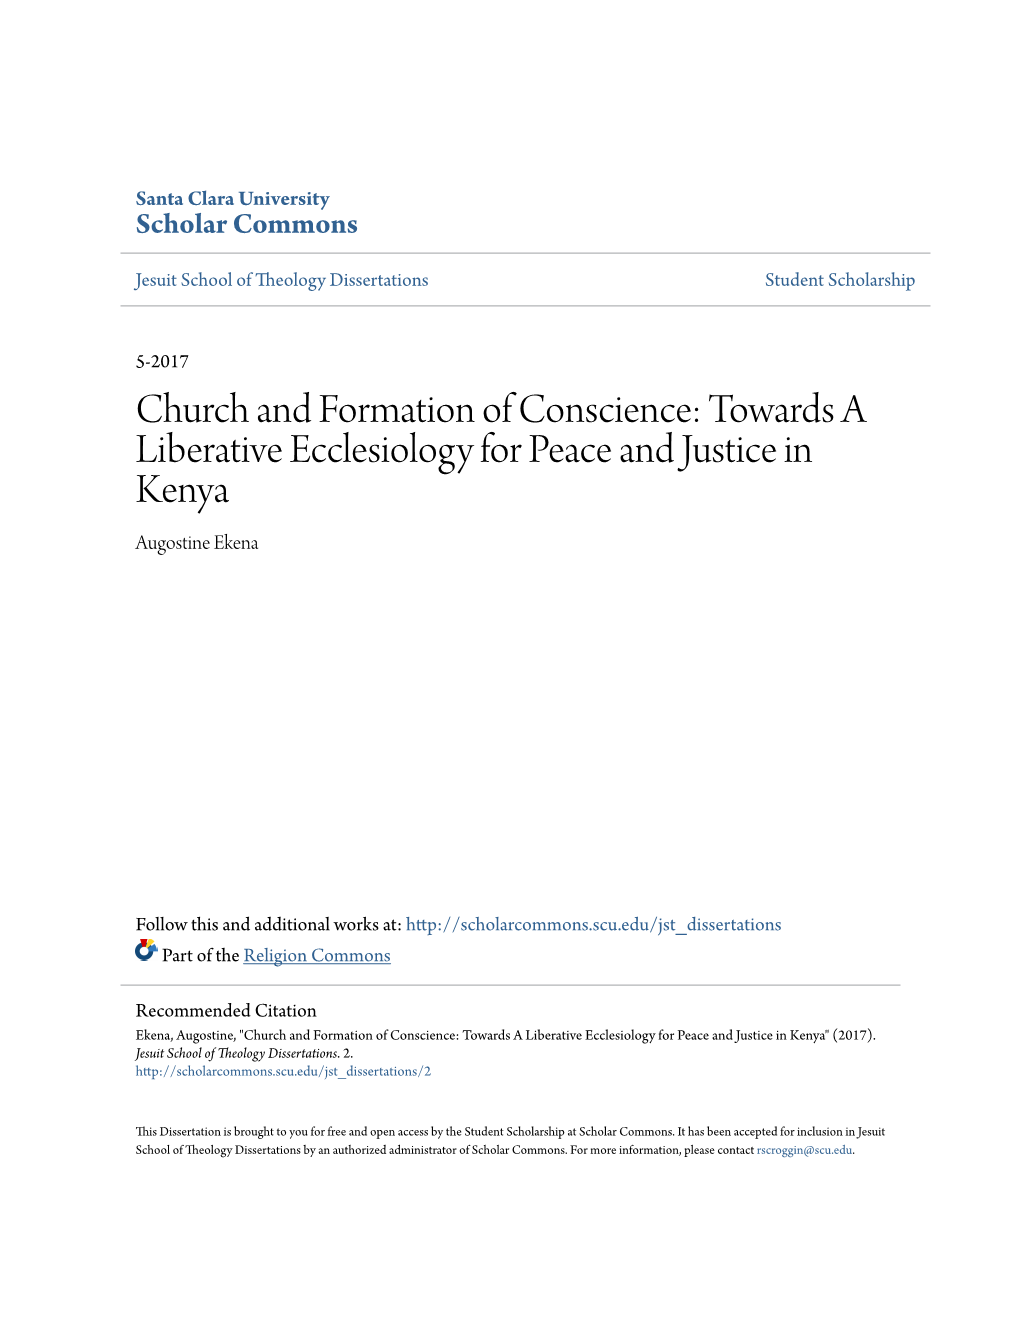 Church and Formation of Conscience: Towards a Liberative Ecclesiology for Peace and Justice in Kenya Augostine Ekena